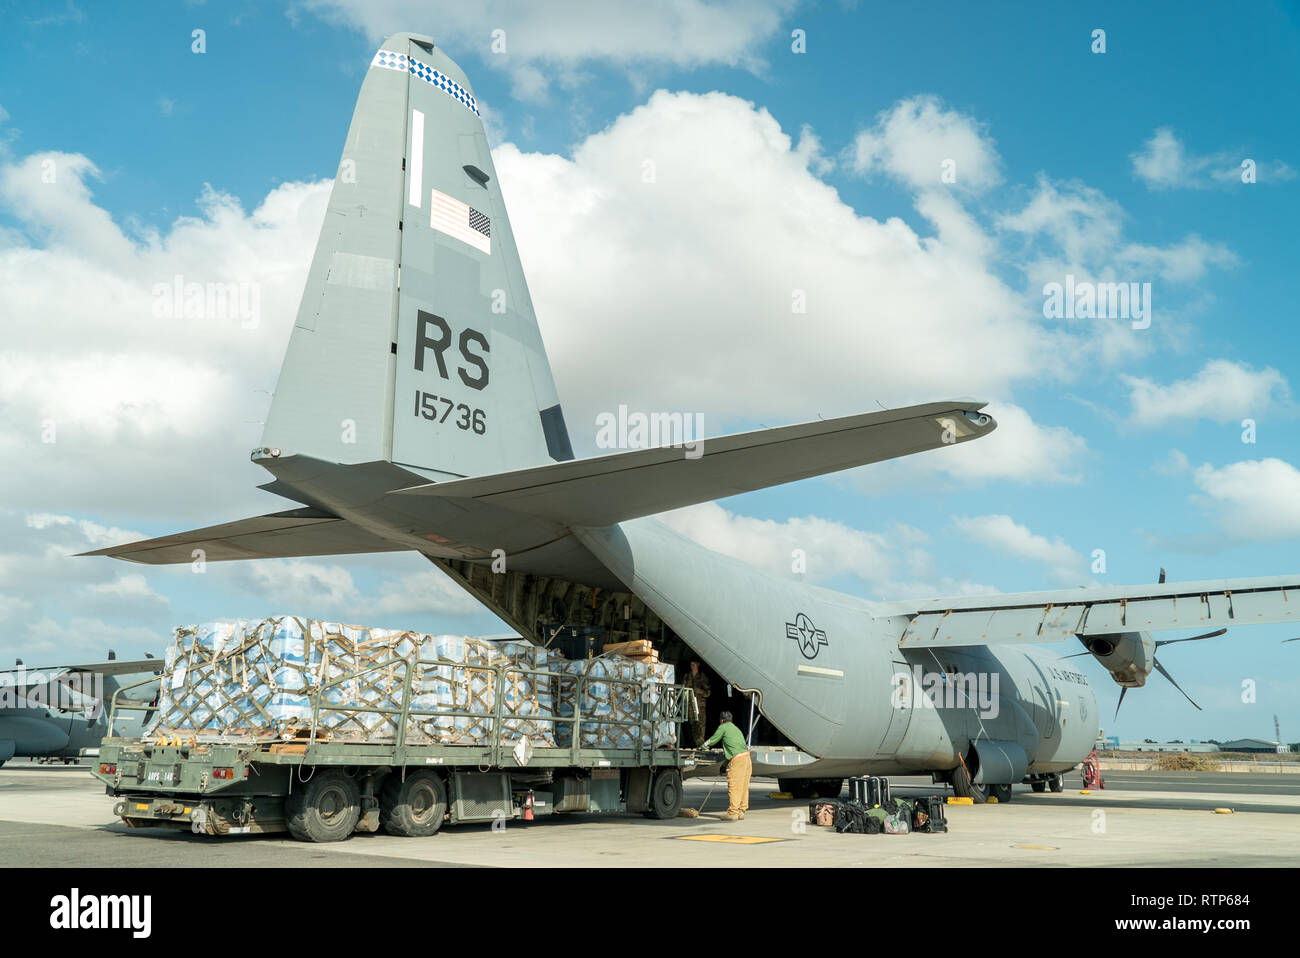 U.S. air operation contractors load a C-130J Hercules, assigned to the 75th Expeditionary Airlift Squadron (EAS), with pallets of water at Camp Lemonnier, Djibouti, Jan. 12, 2019. The 75th EAS supports Combined Joint Task Force – Horn of Africa with medical evacuations, disaster relief, humanitarian and airdrop operations. (U.S. Air Force photo by Tech. Sgt. Thomas Grimes) Stock Photo